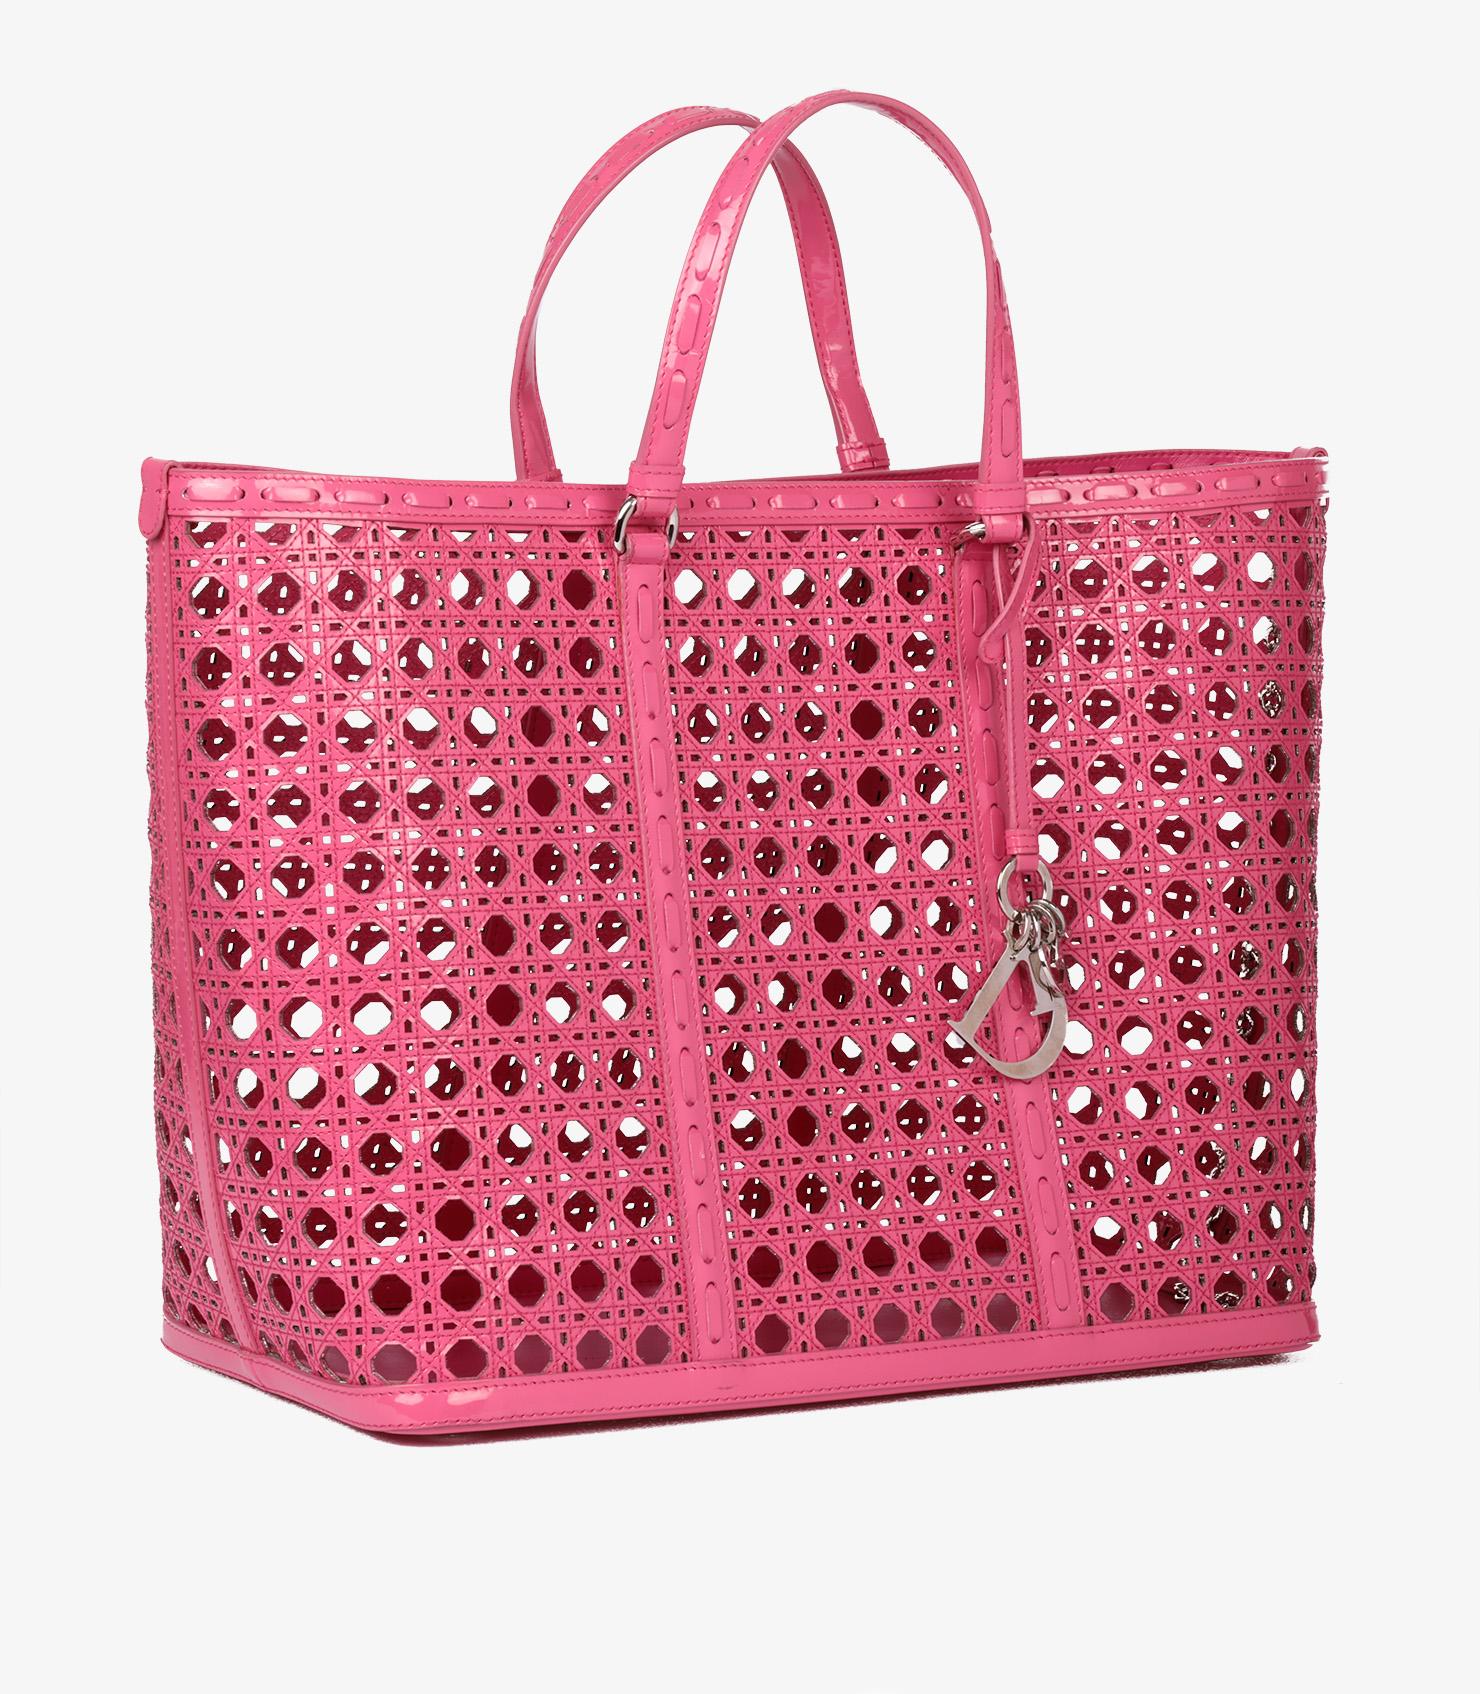 Christian Dior Pink Perforated Patent Leather Tote Bag In Excellent Condition For Sale In Bishop's Stortford, Hertfordshire